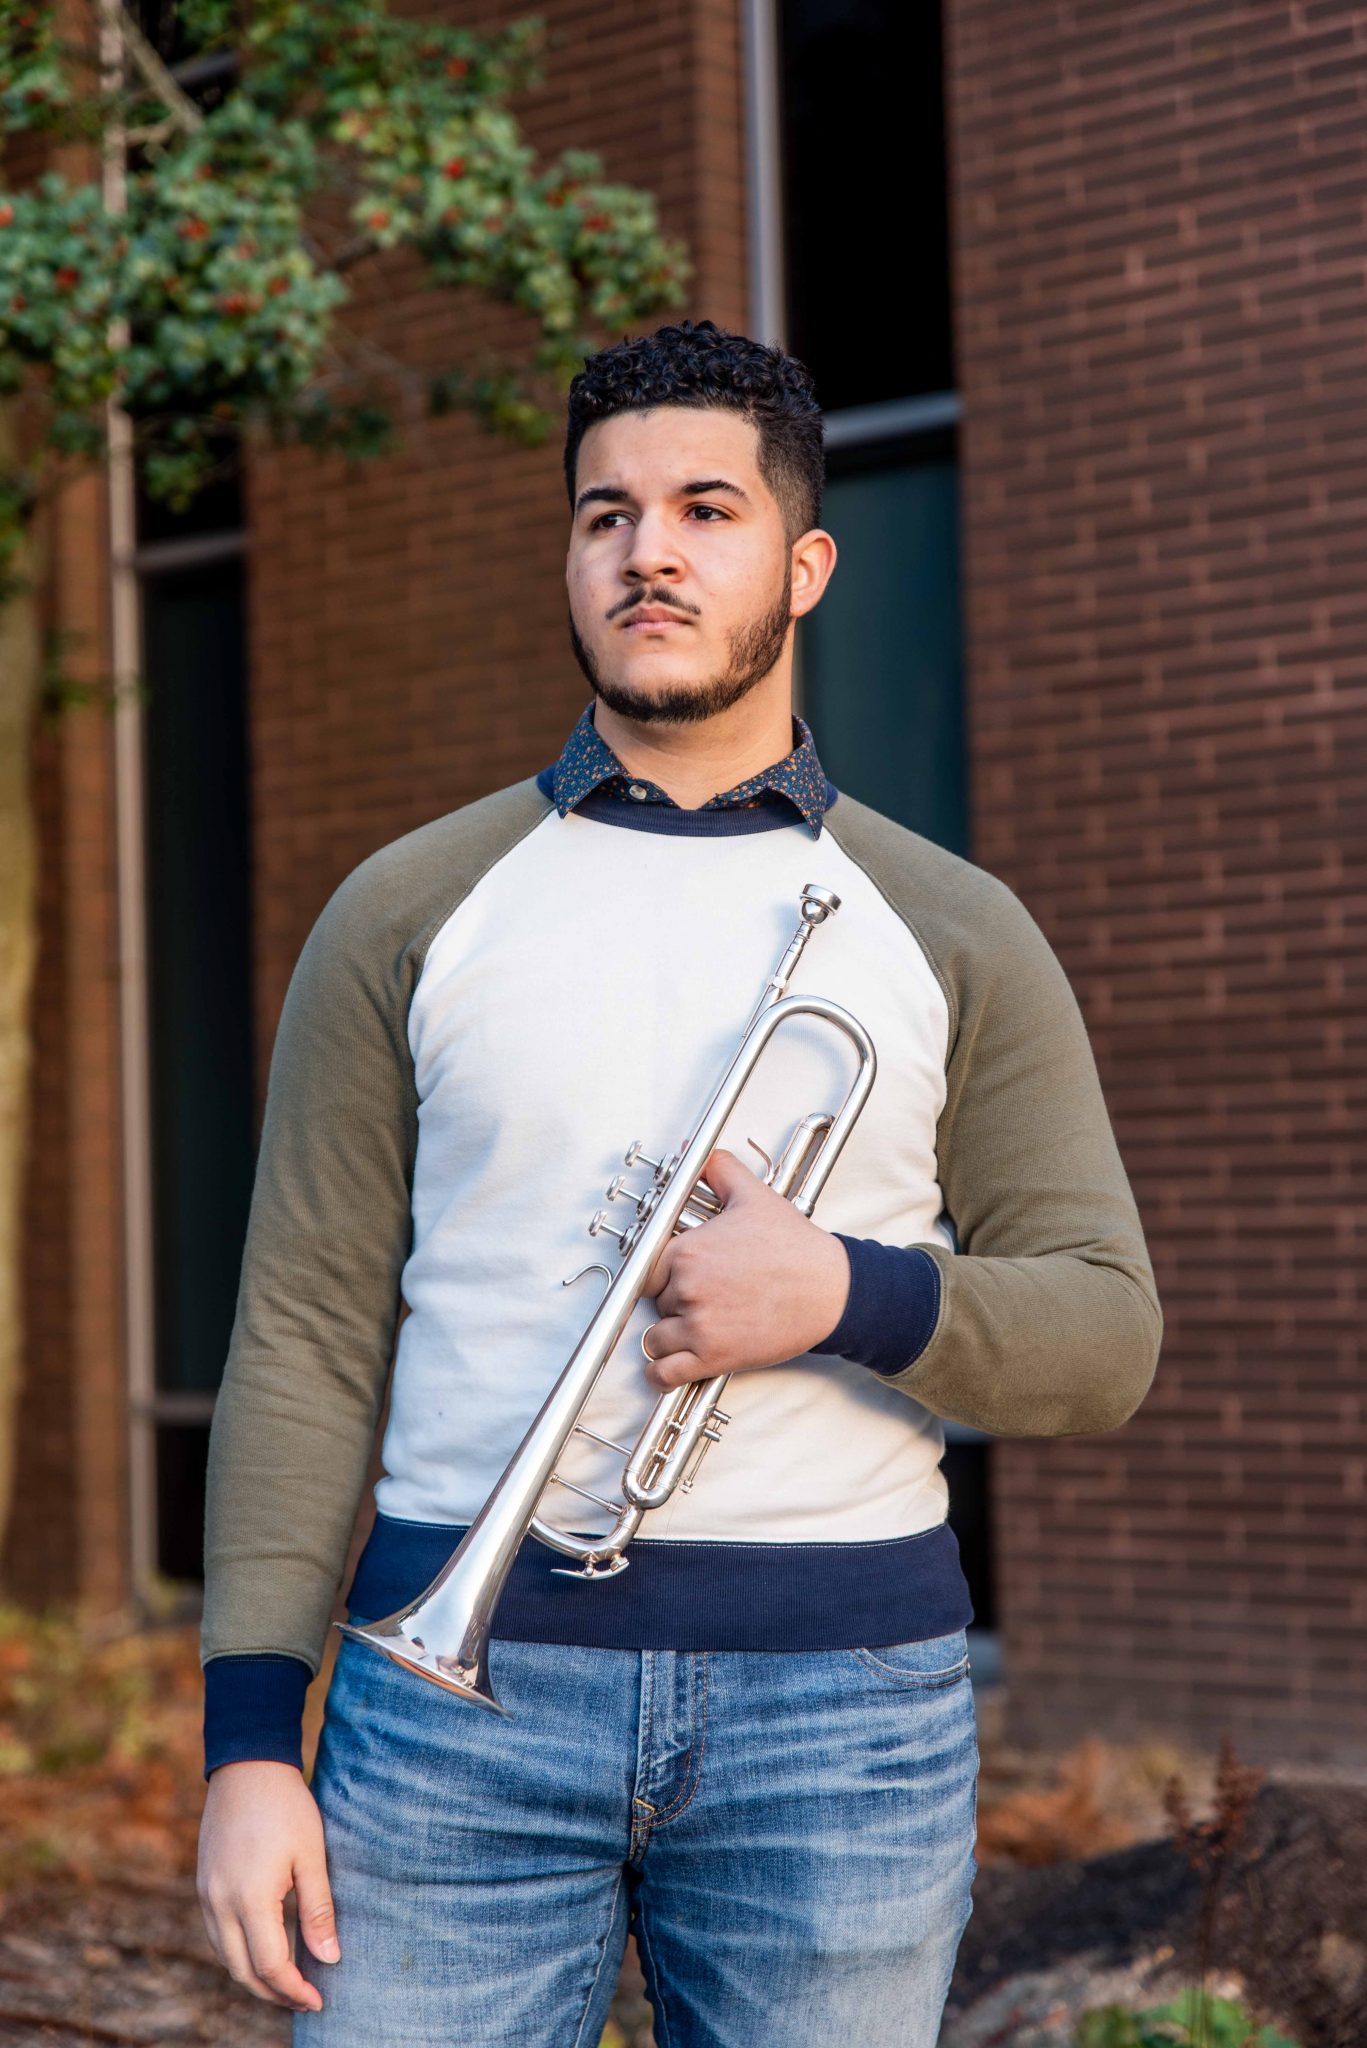 Luis holding a trumpet outside Wilson Hall.